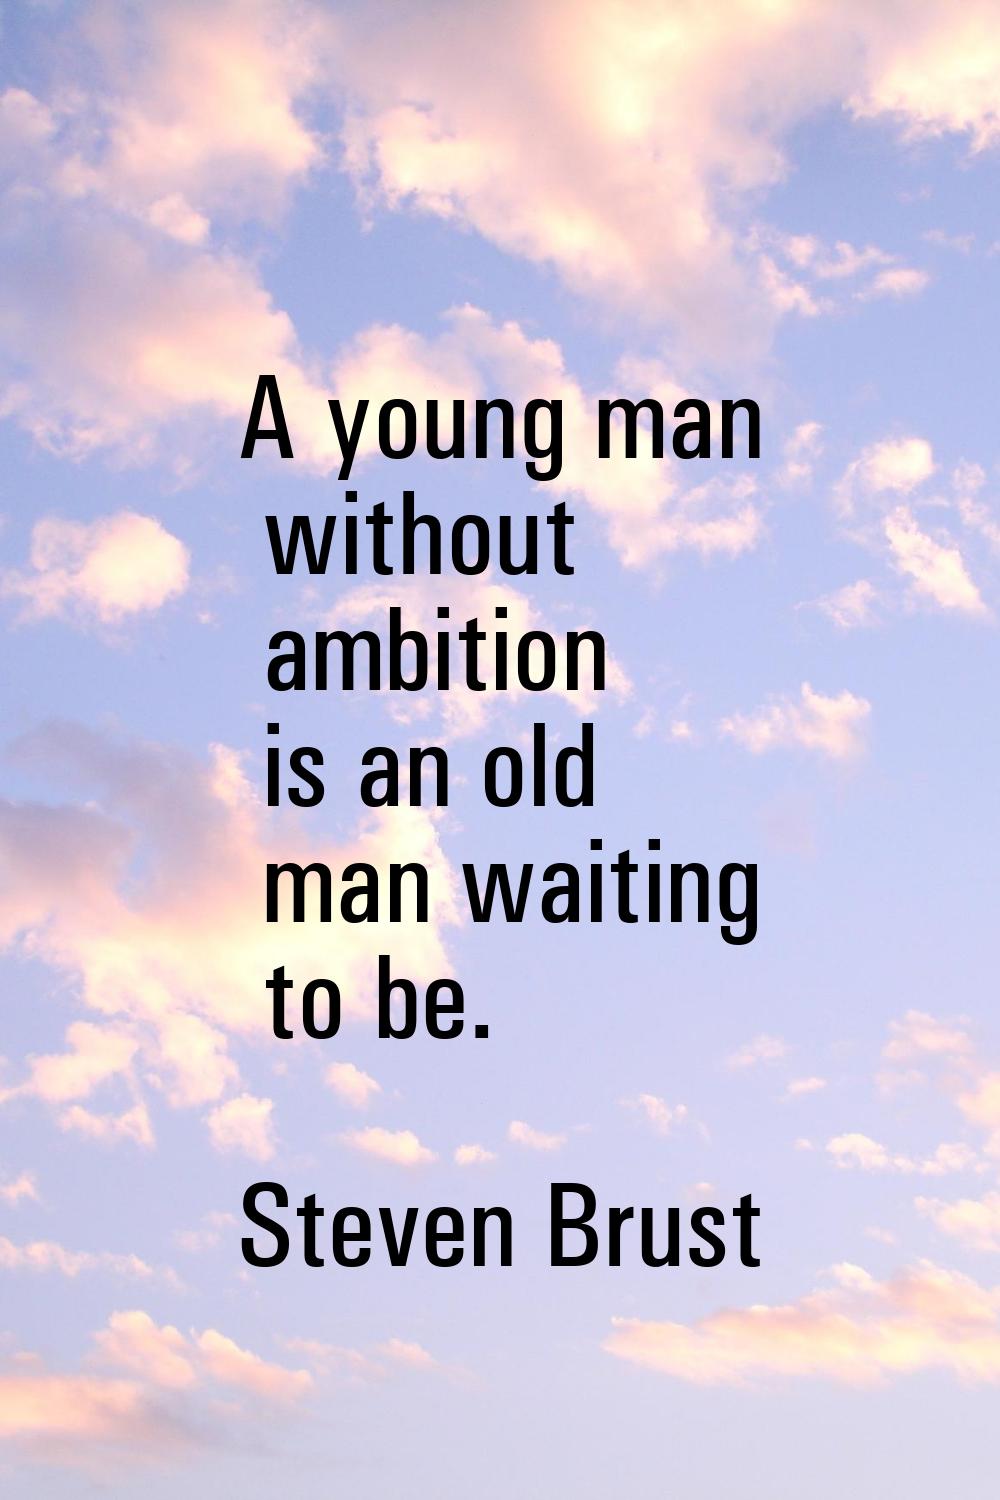 A young man without ambition is an old man waiting to be.